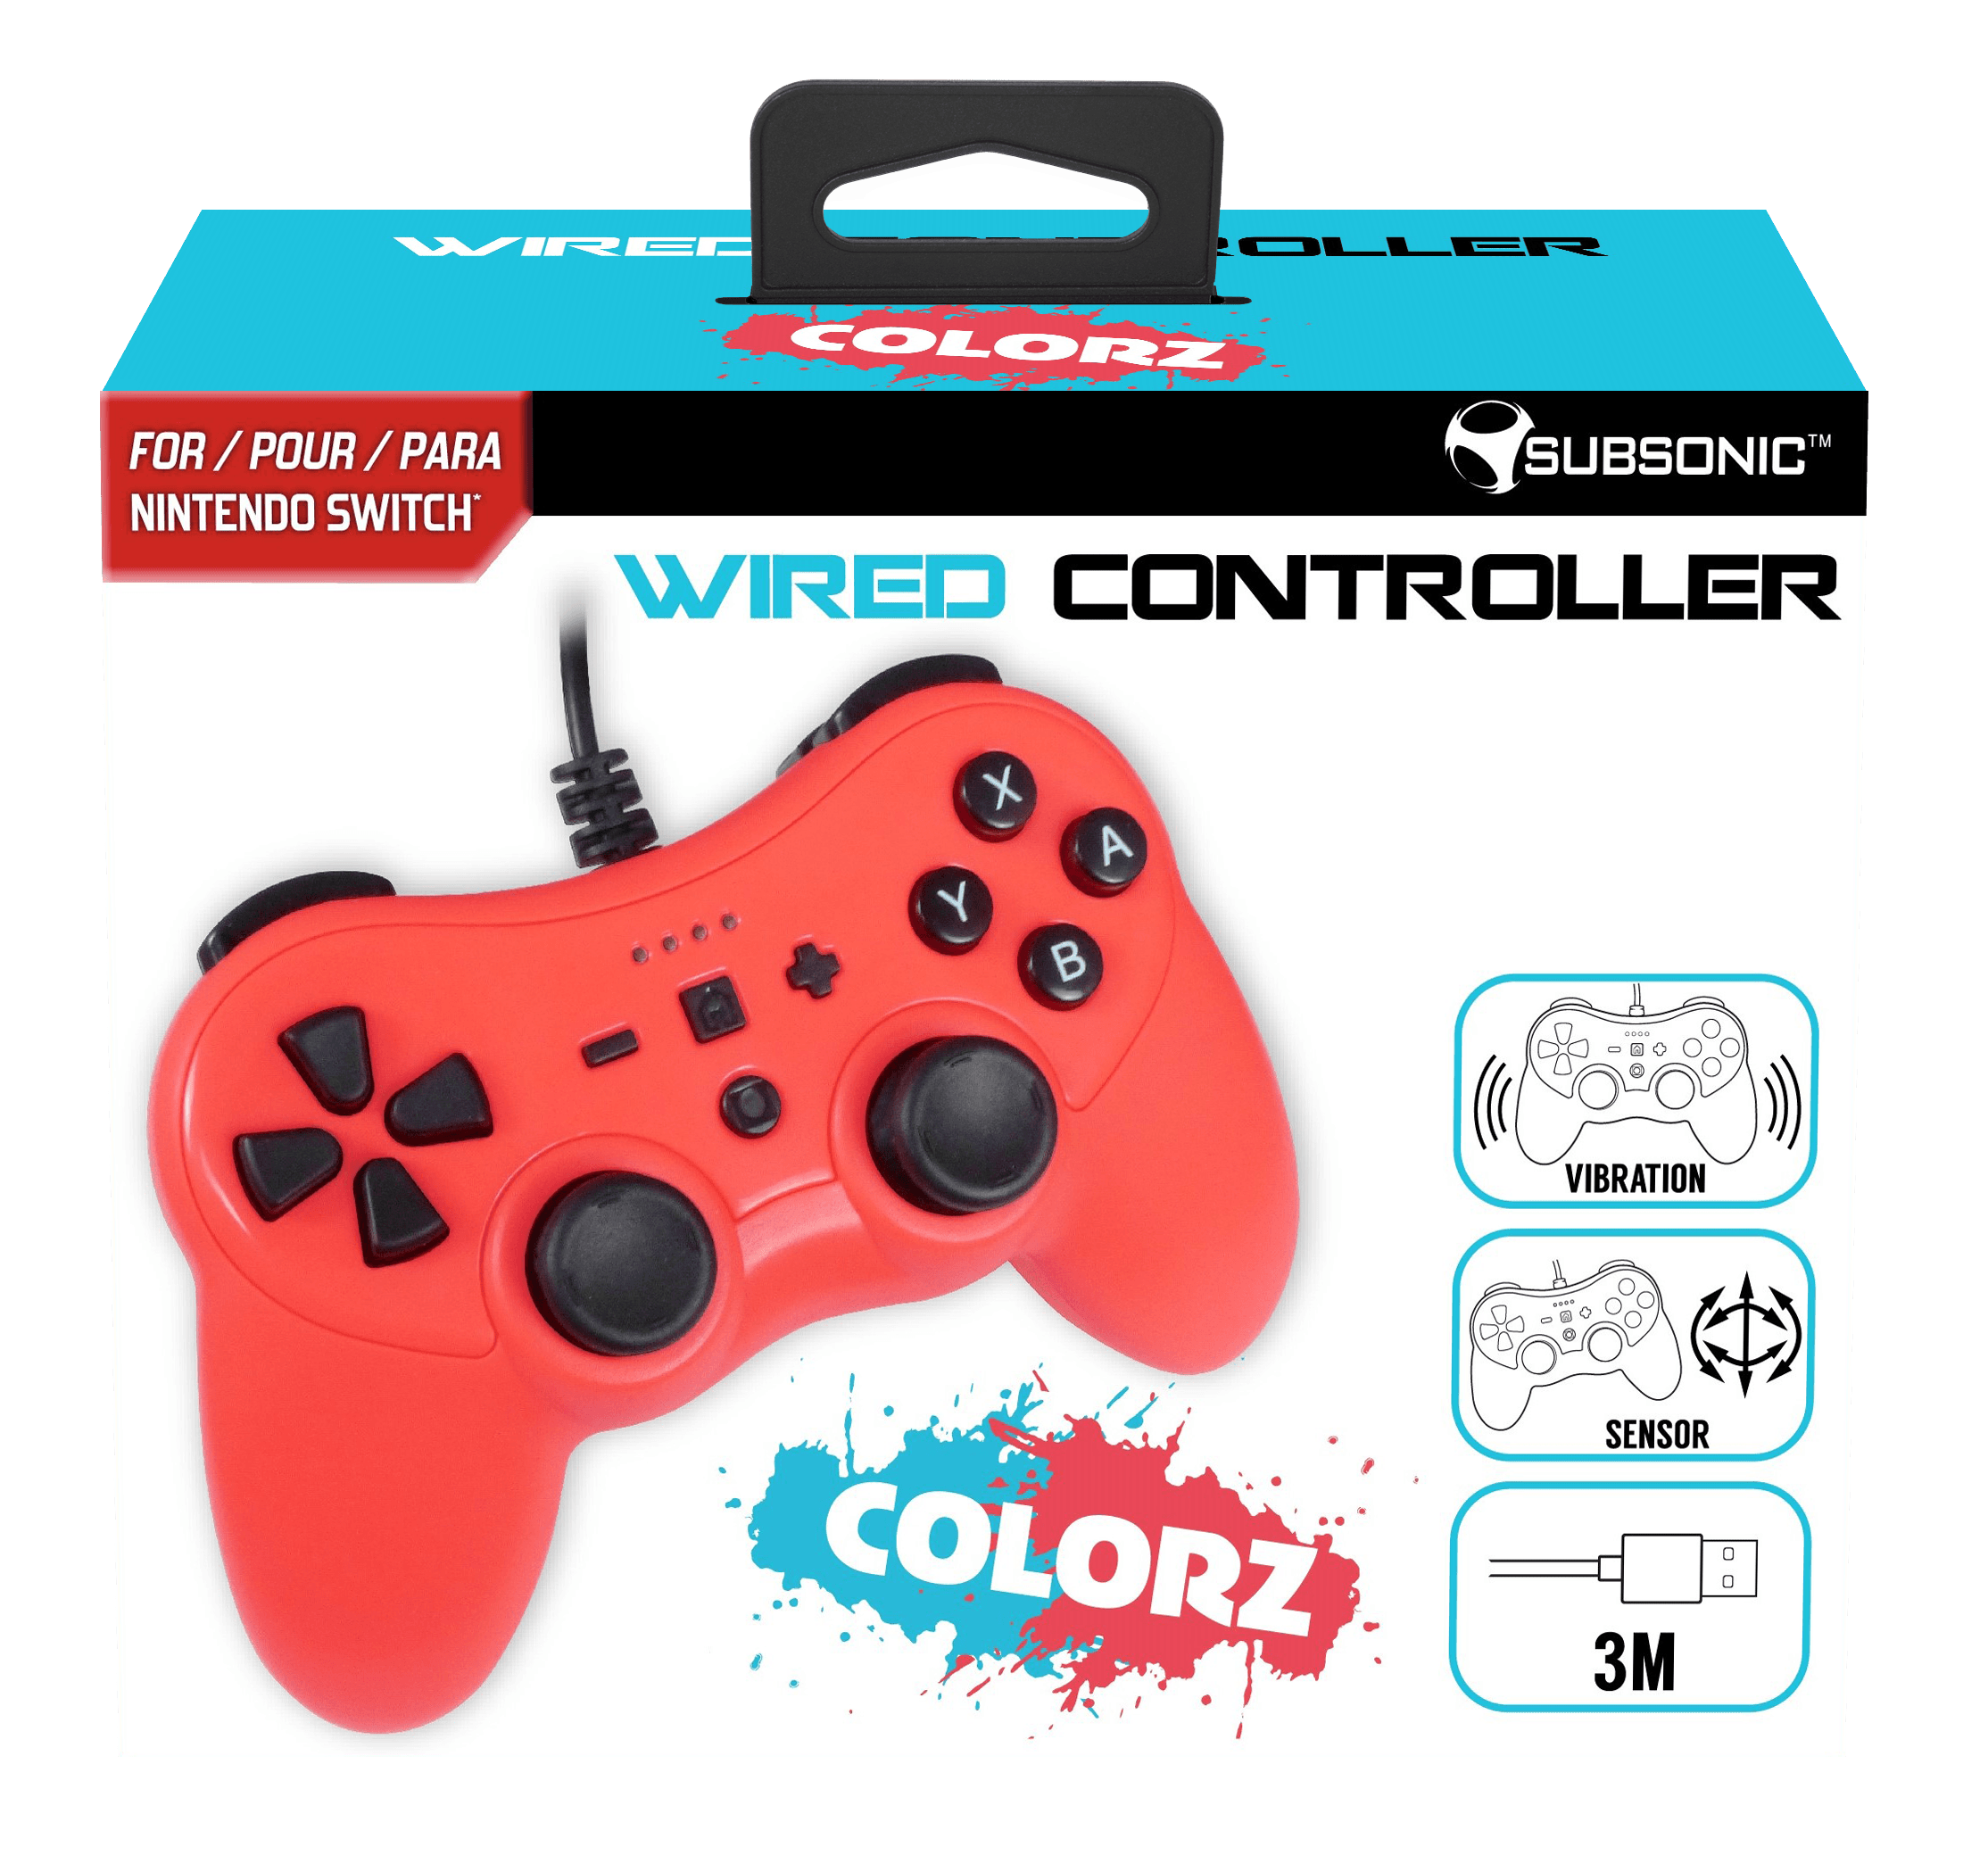 Wired Red Switch Controller - Want a New Gadget